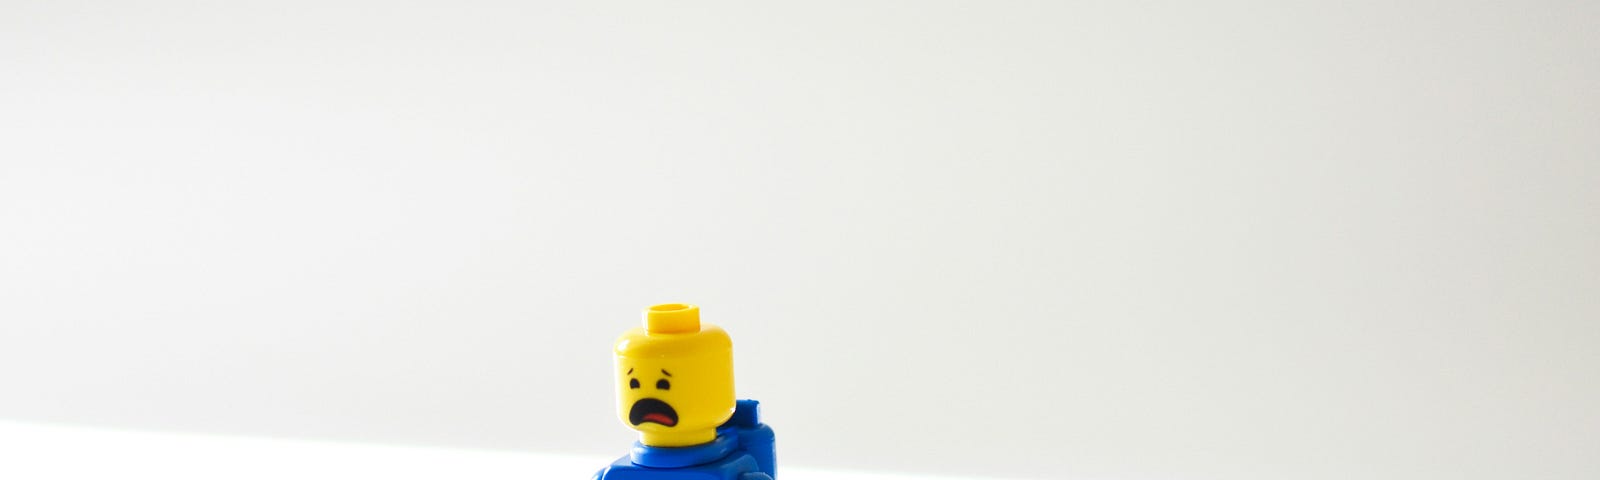 Lego man with blue clothes and a yellow head with panicky face.